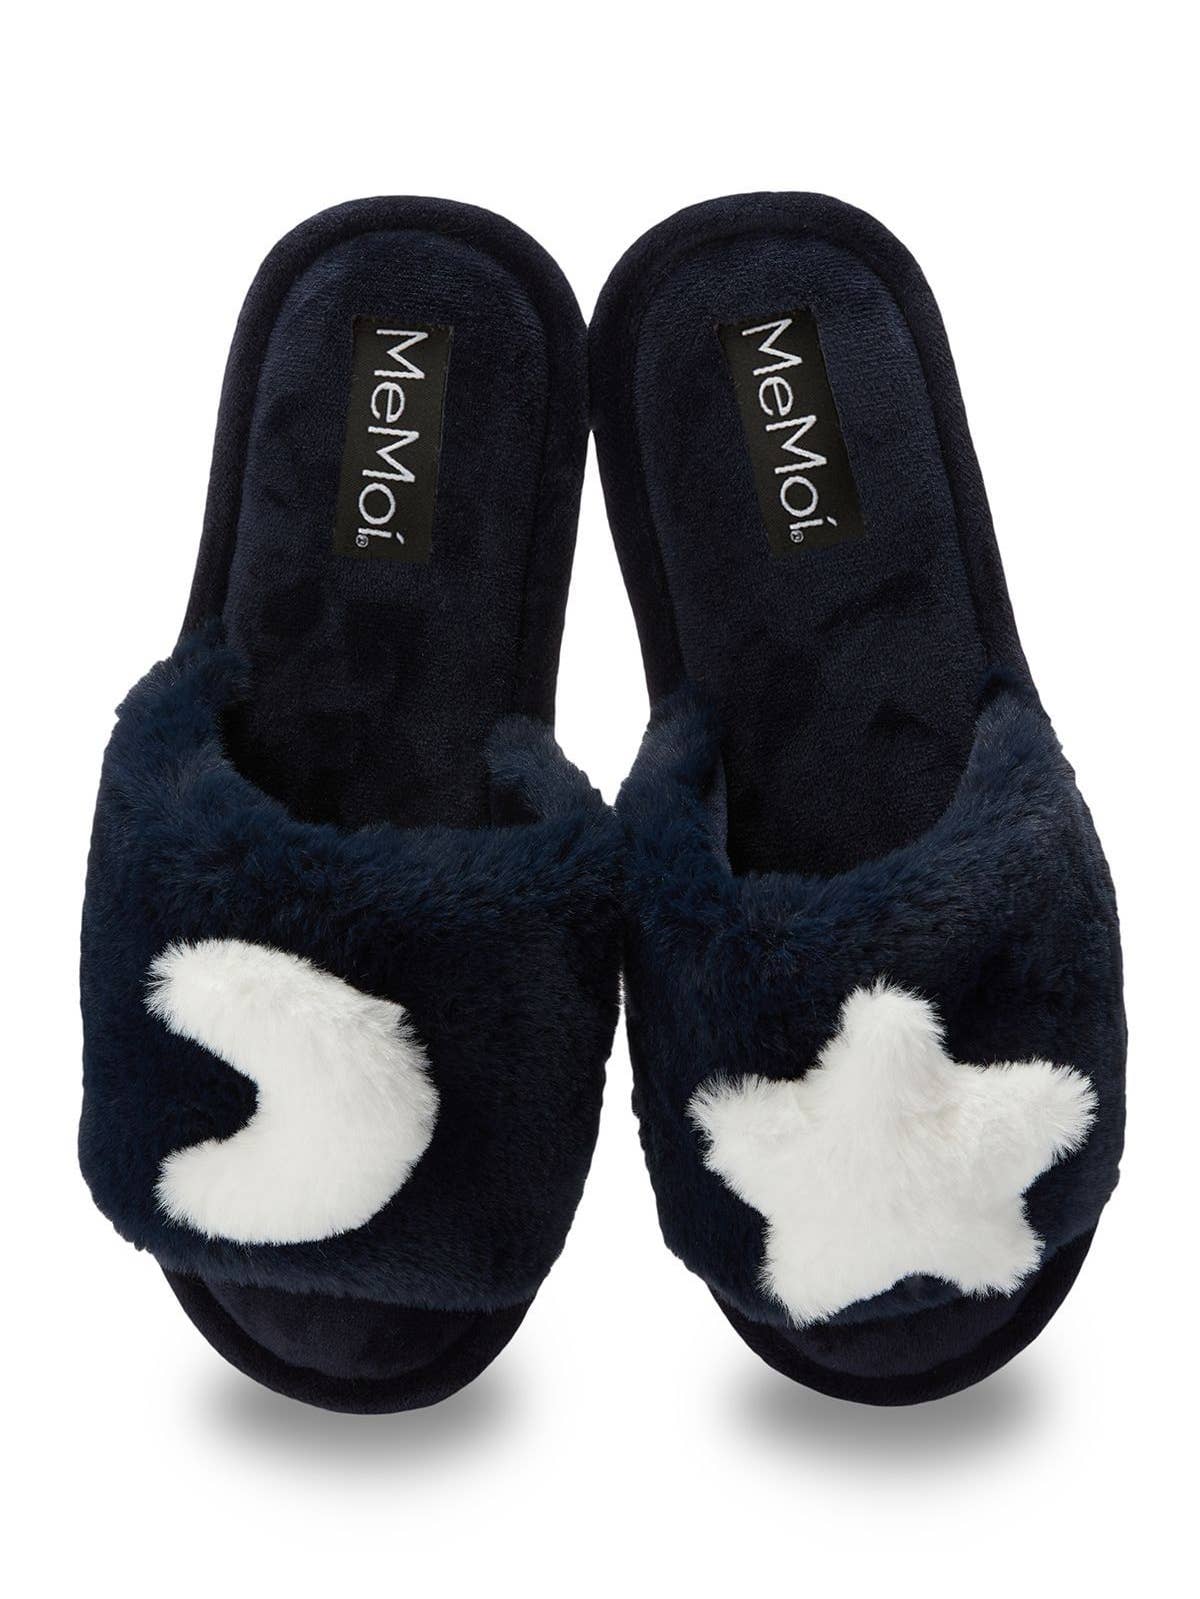 Star and Moon Plush Slippers in Midnight